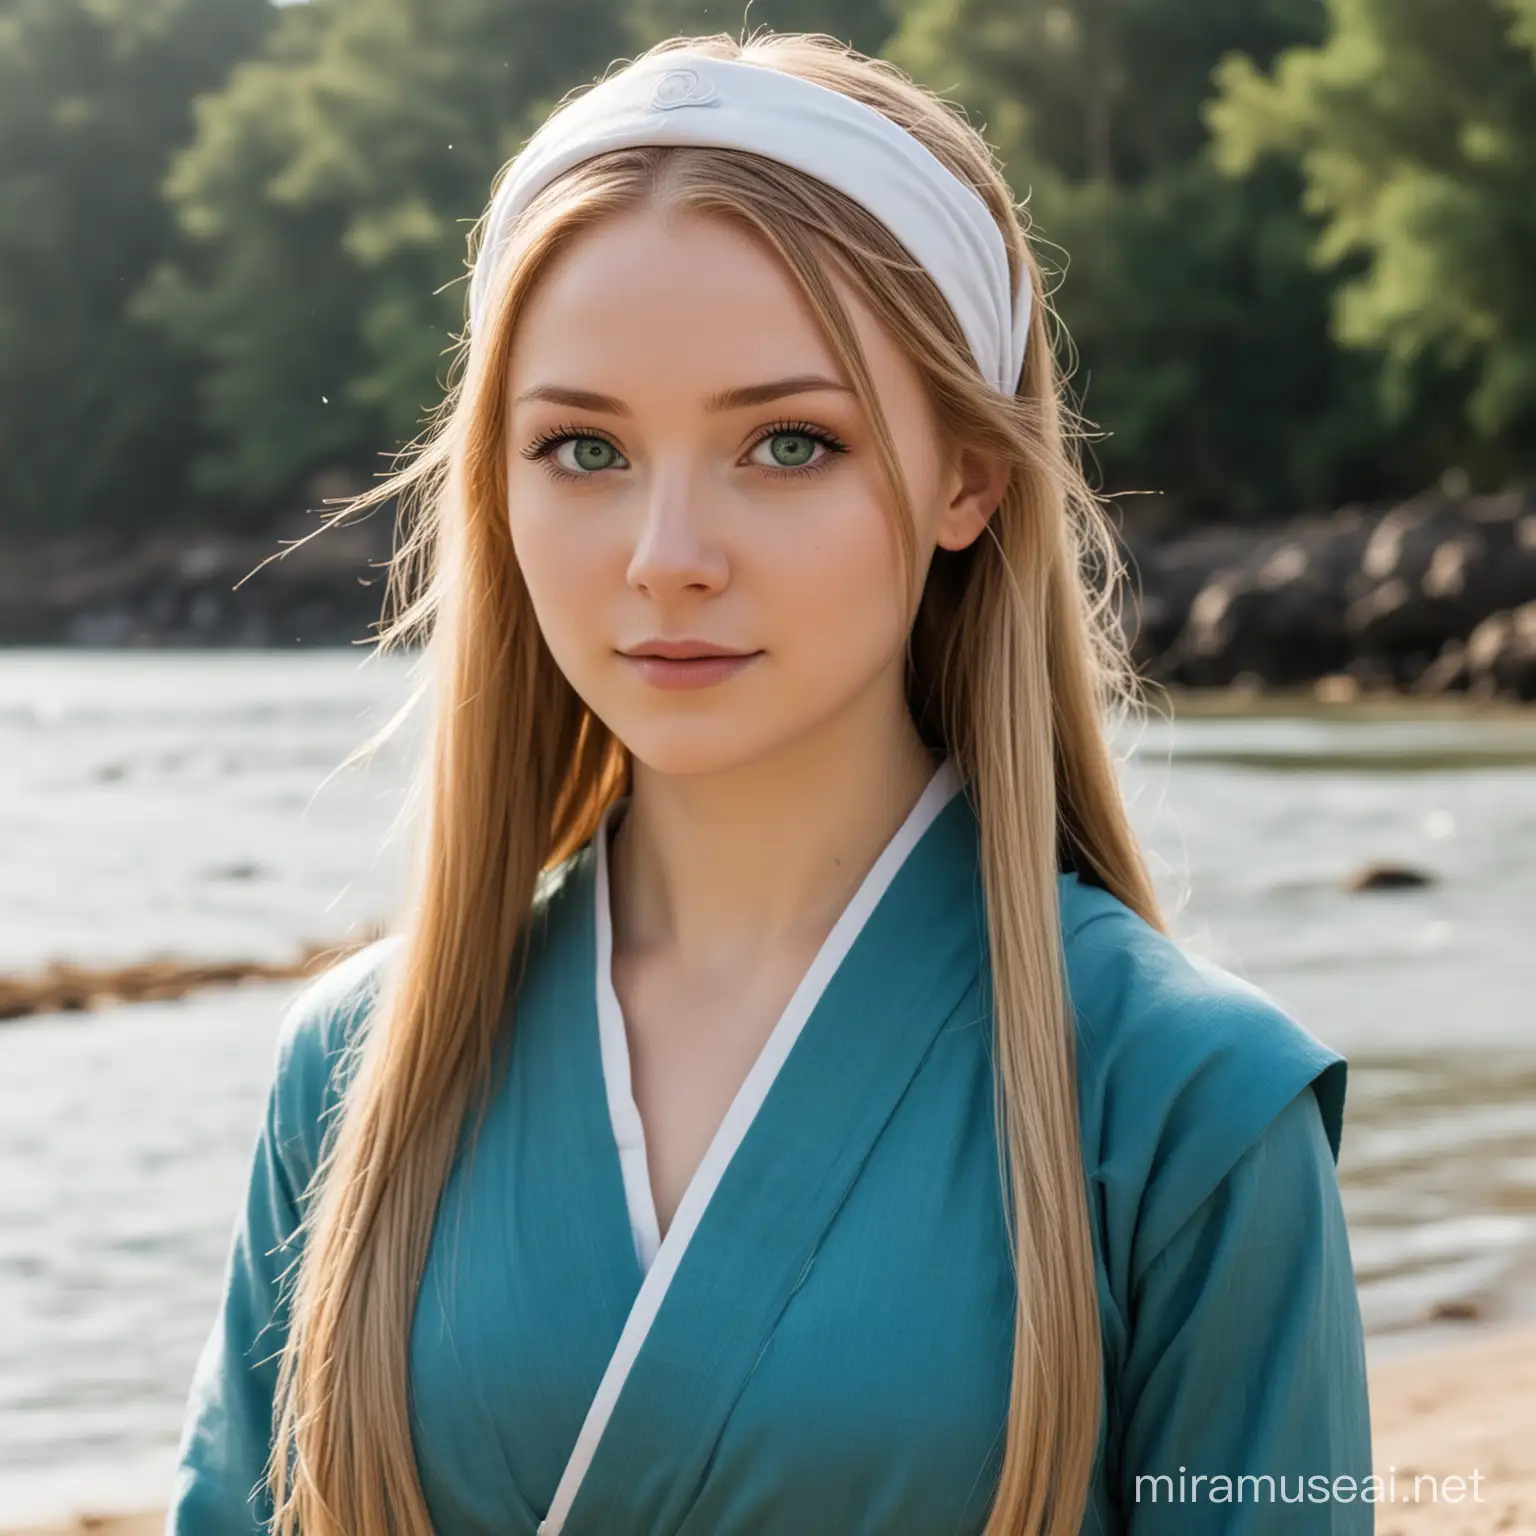 In the style of Avatar: The Last Airbender, a water-bender with pale skin, long light brown hair with a white headband, blue-green eyes, blue clothing, average height